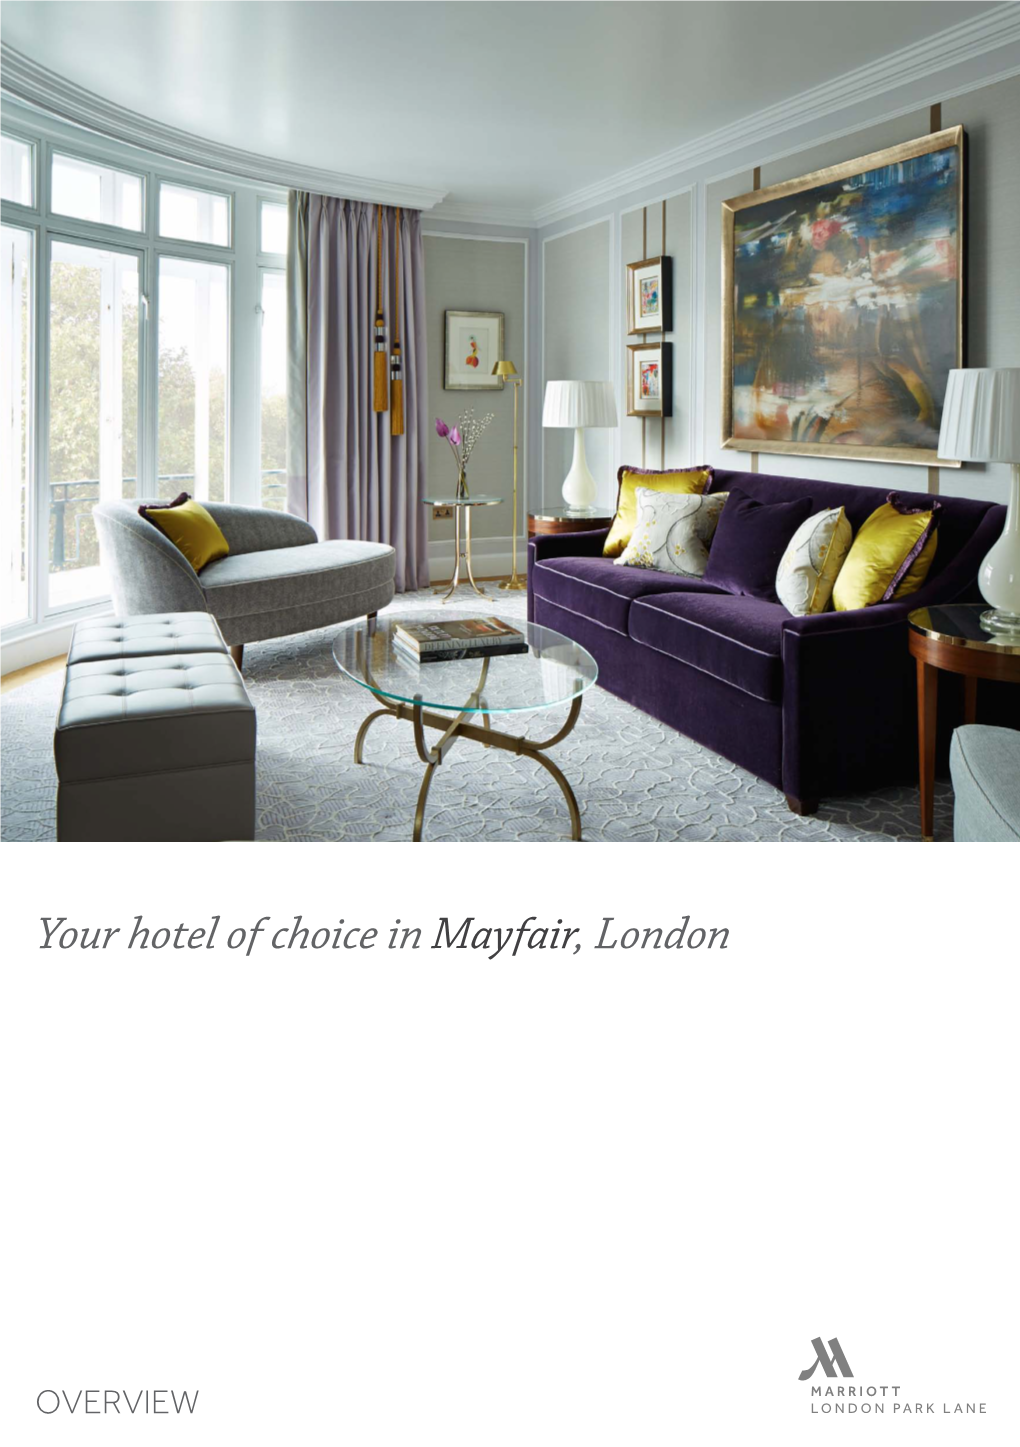 Your Hotel of Choice in Mayfair, London